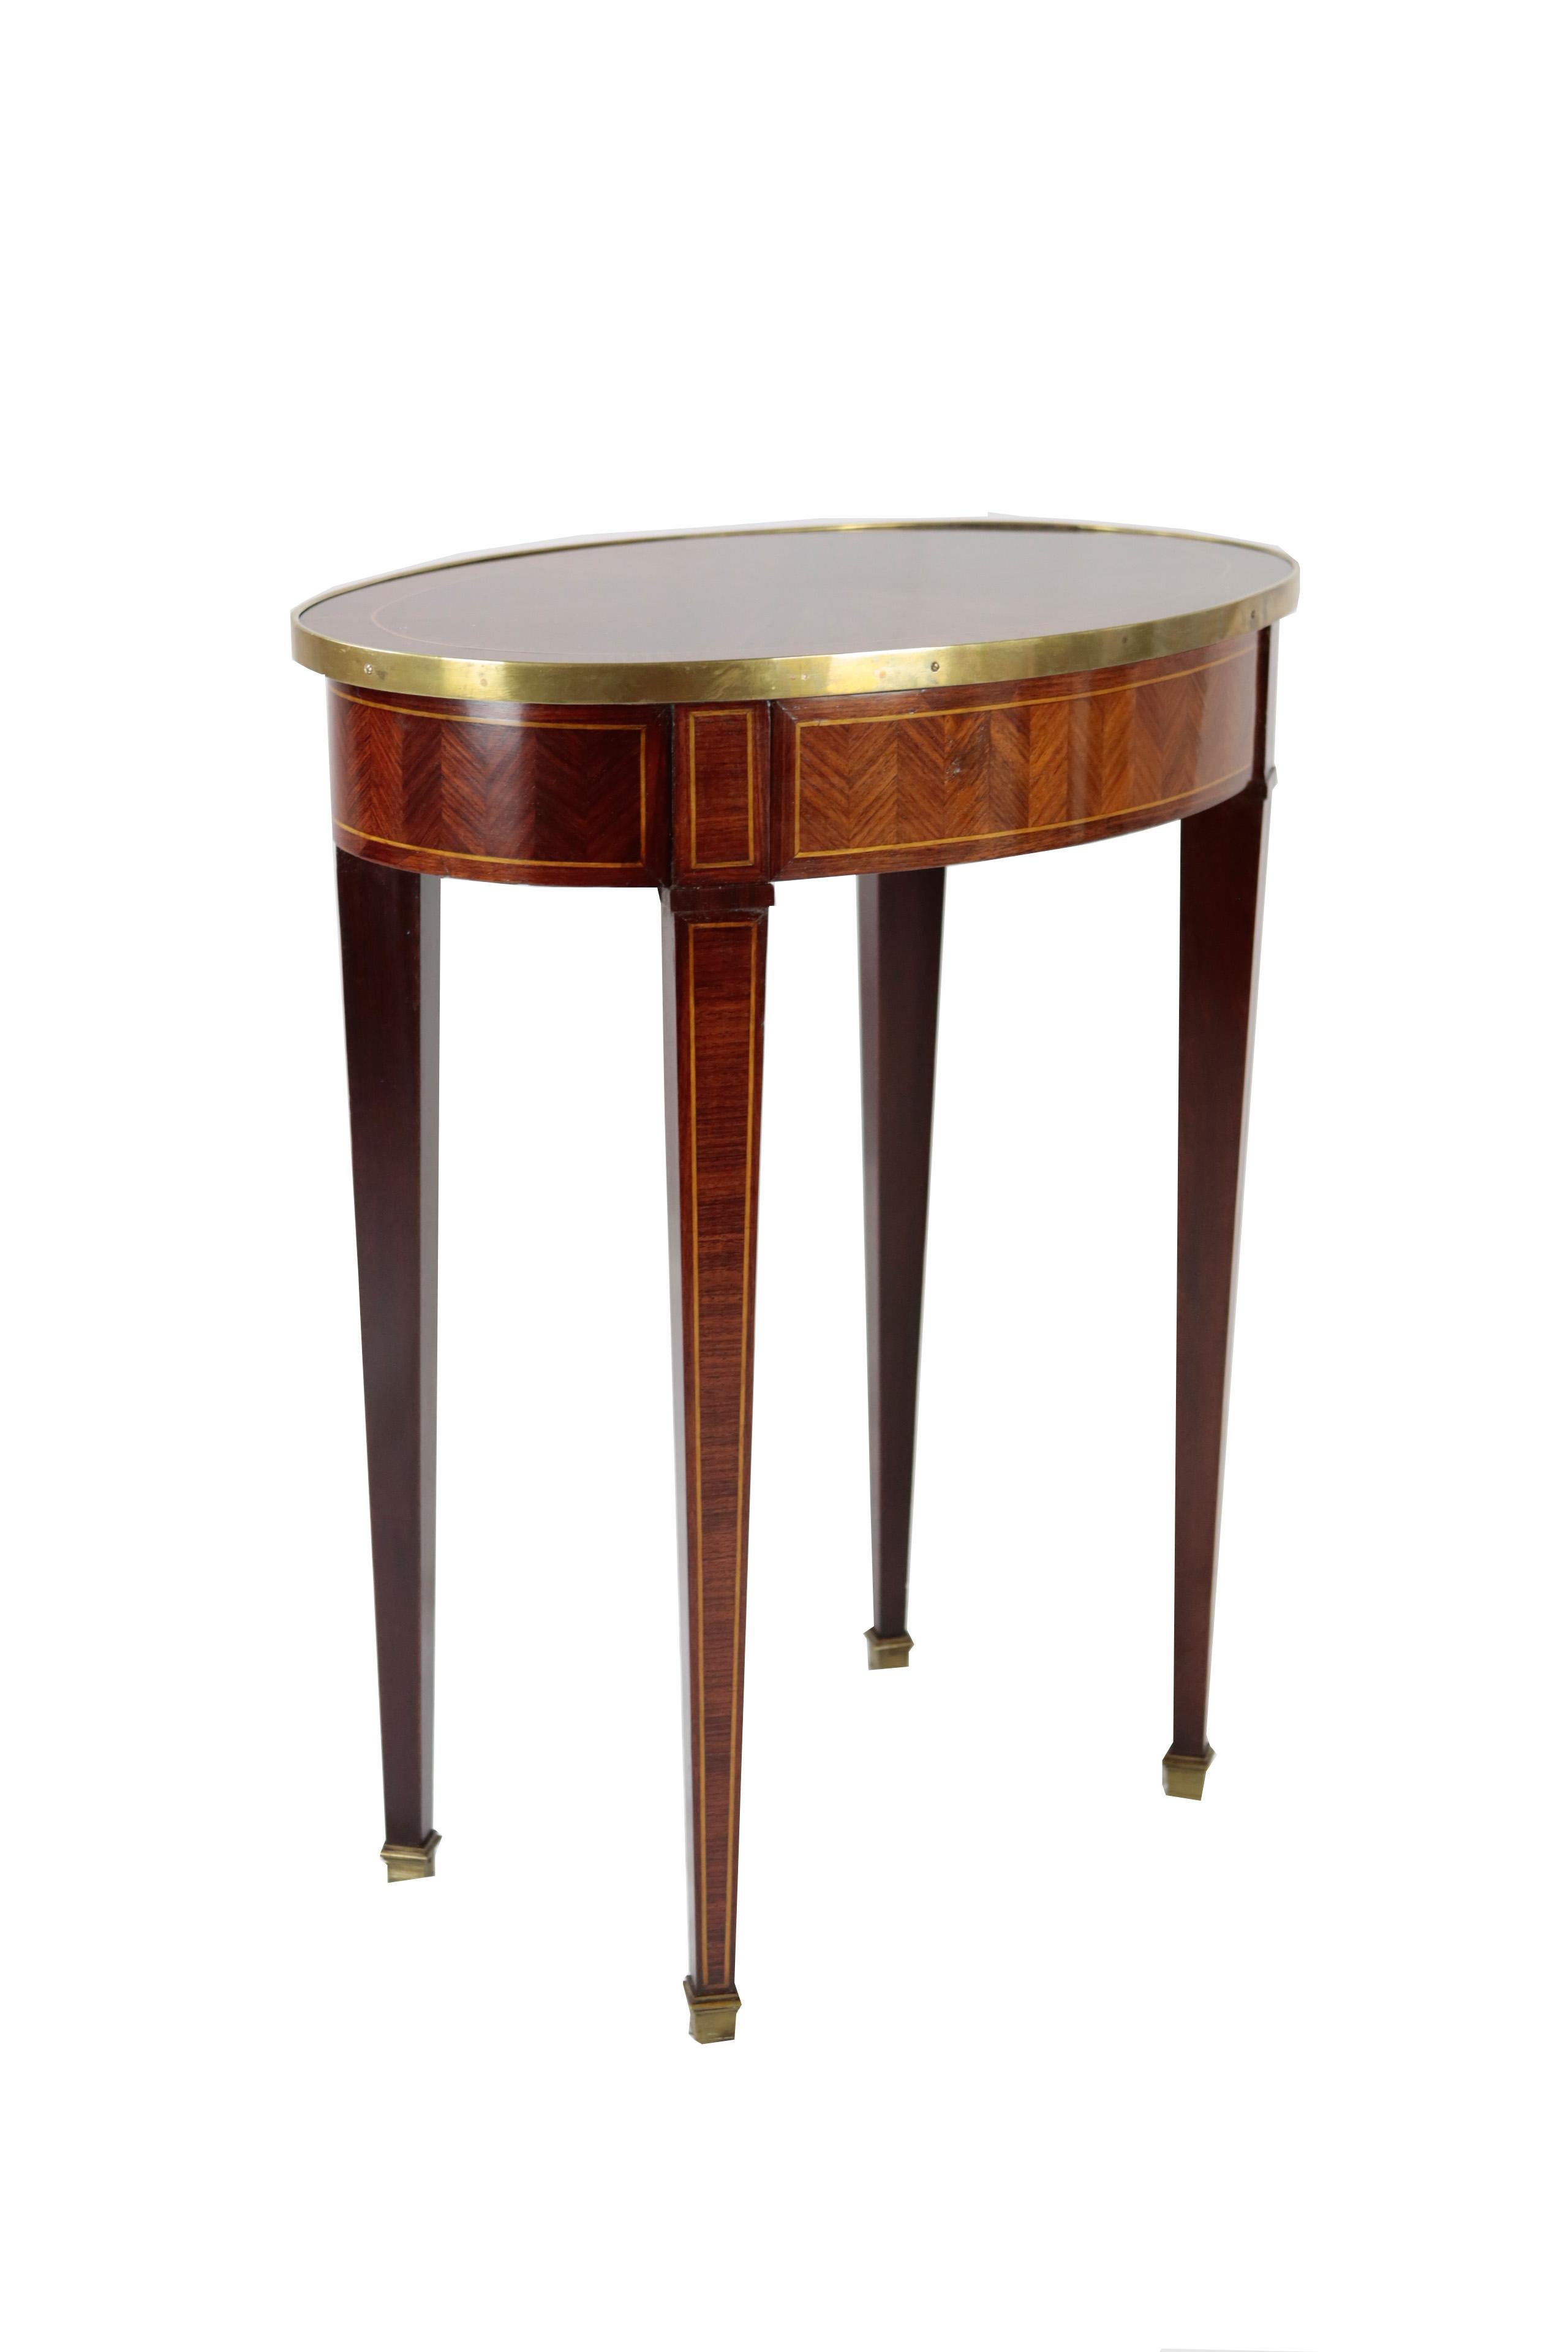 Veneer Oval Shaped French Rosewood Side Table, Late 19th Century, circa 1880, 1 Drawer For Sale